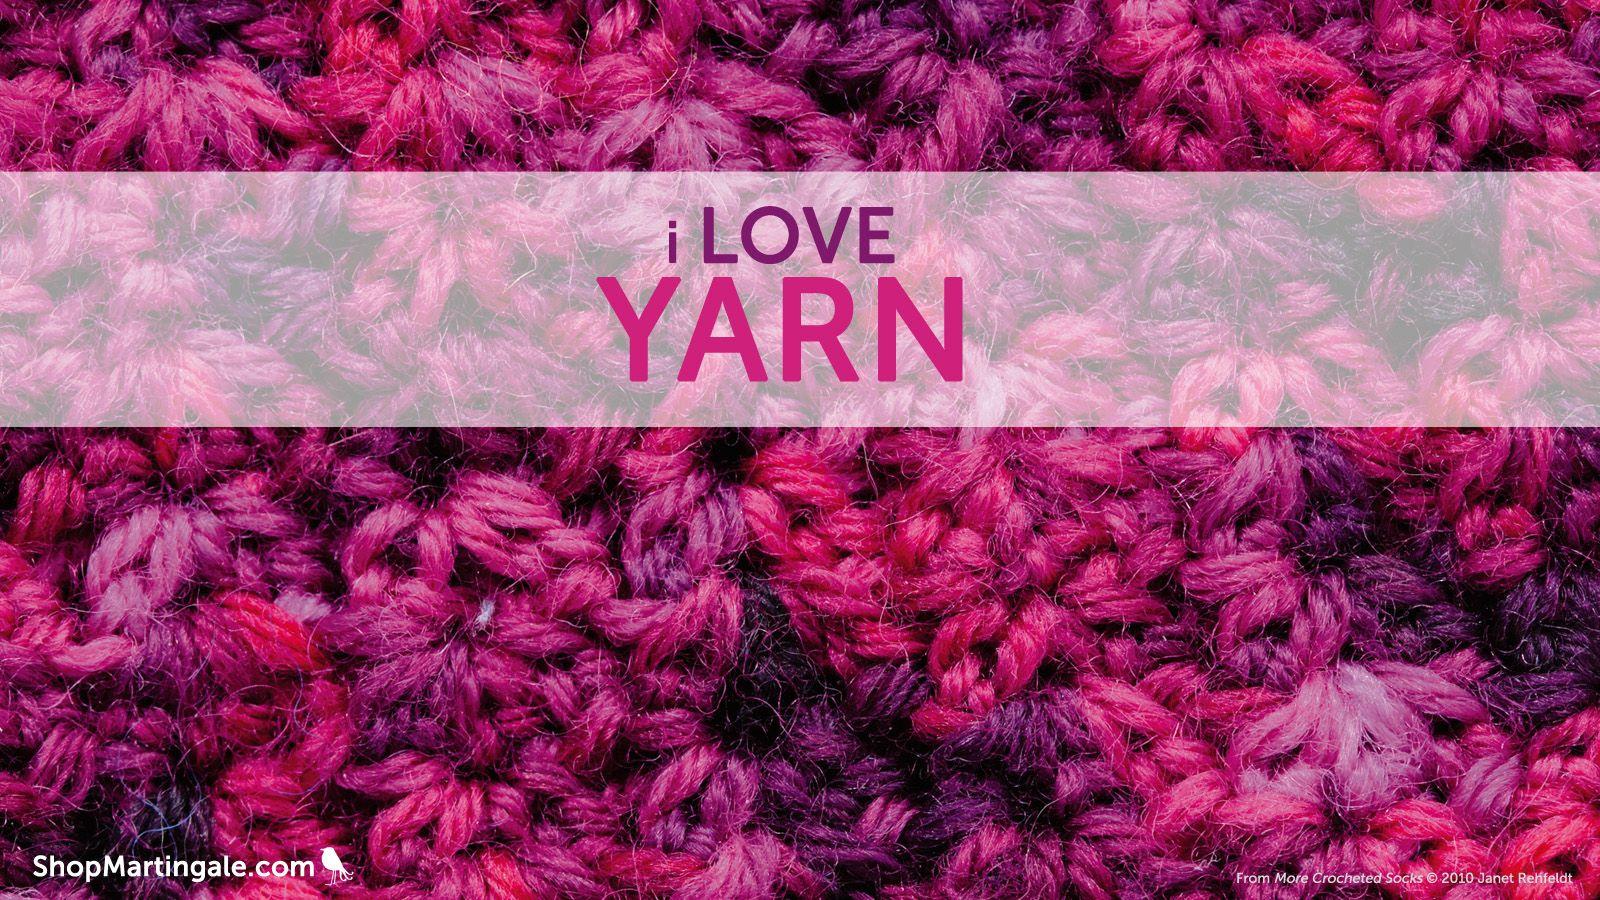 I play, you play—we all play on I Love Yarn Day! + giveaway